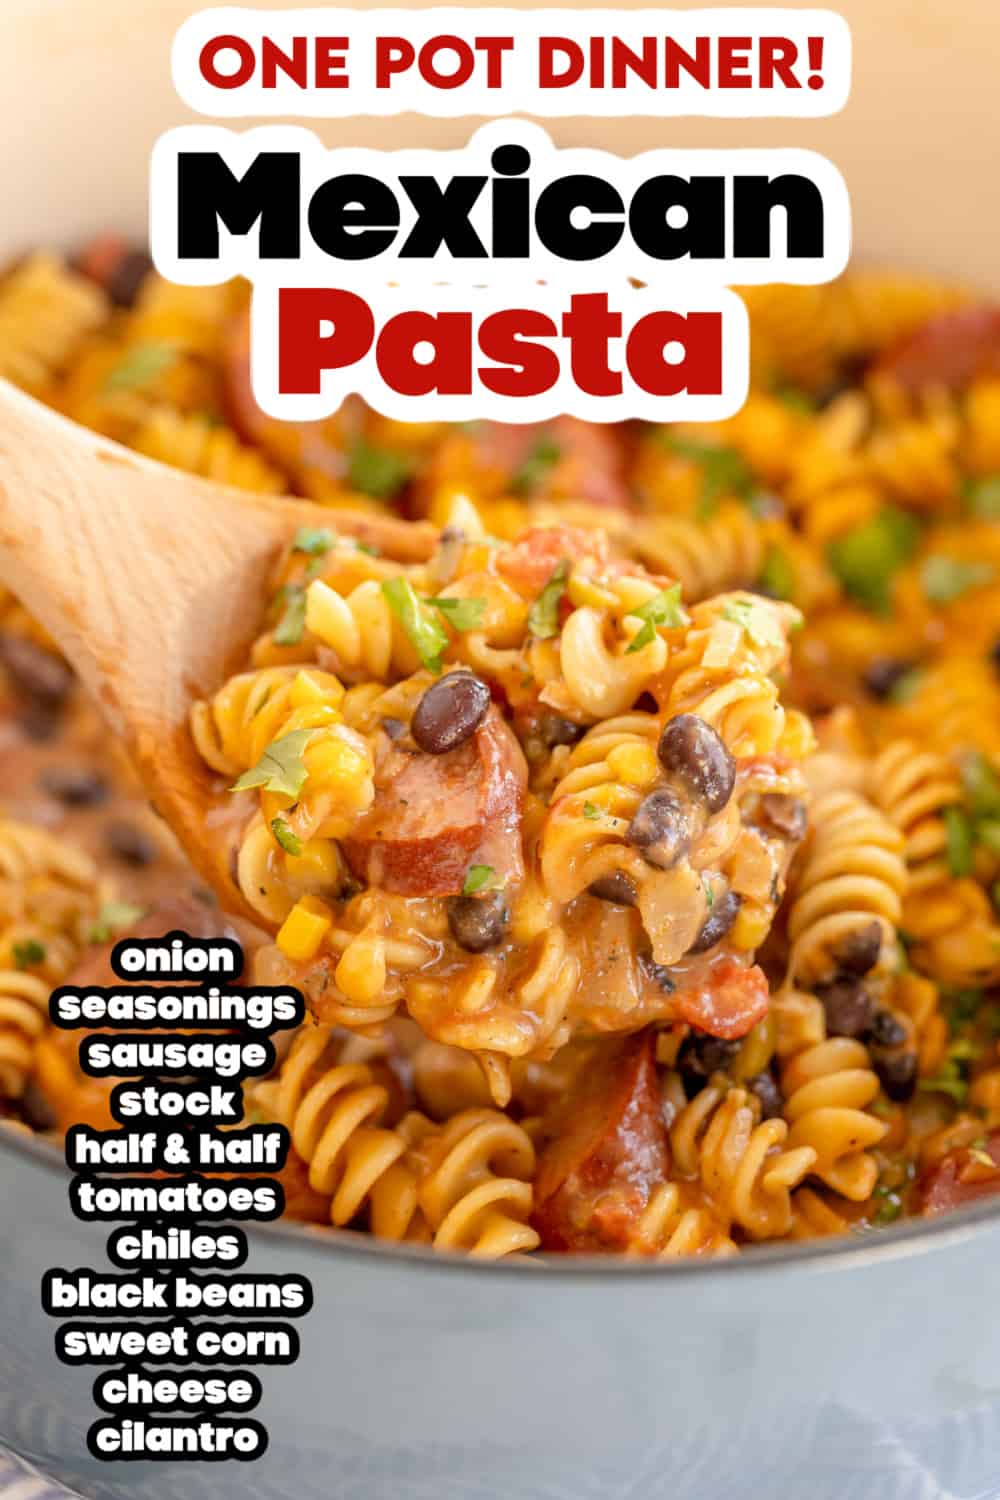 Mexican pasta in a dutch oven with a wooden spoon. with recipe name and ingredients overlaid in text.